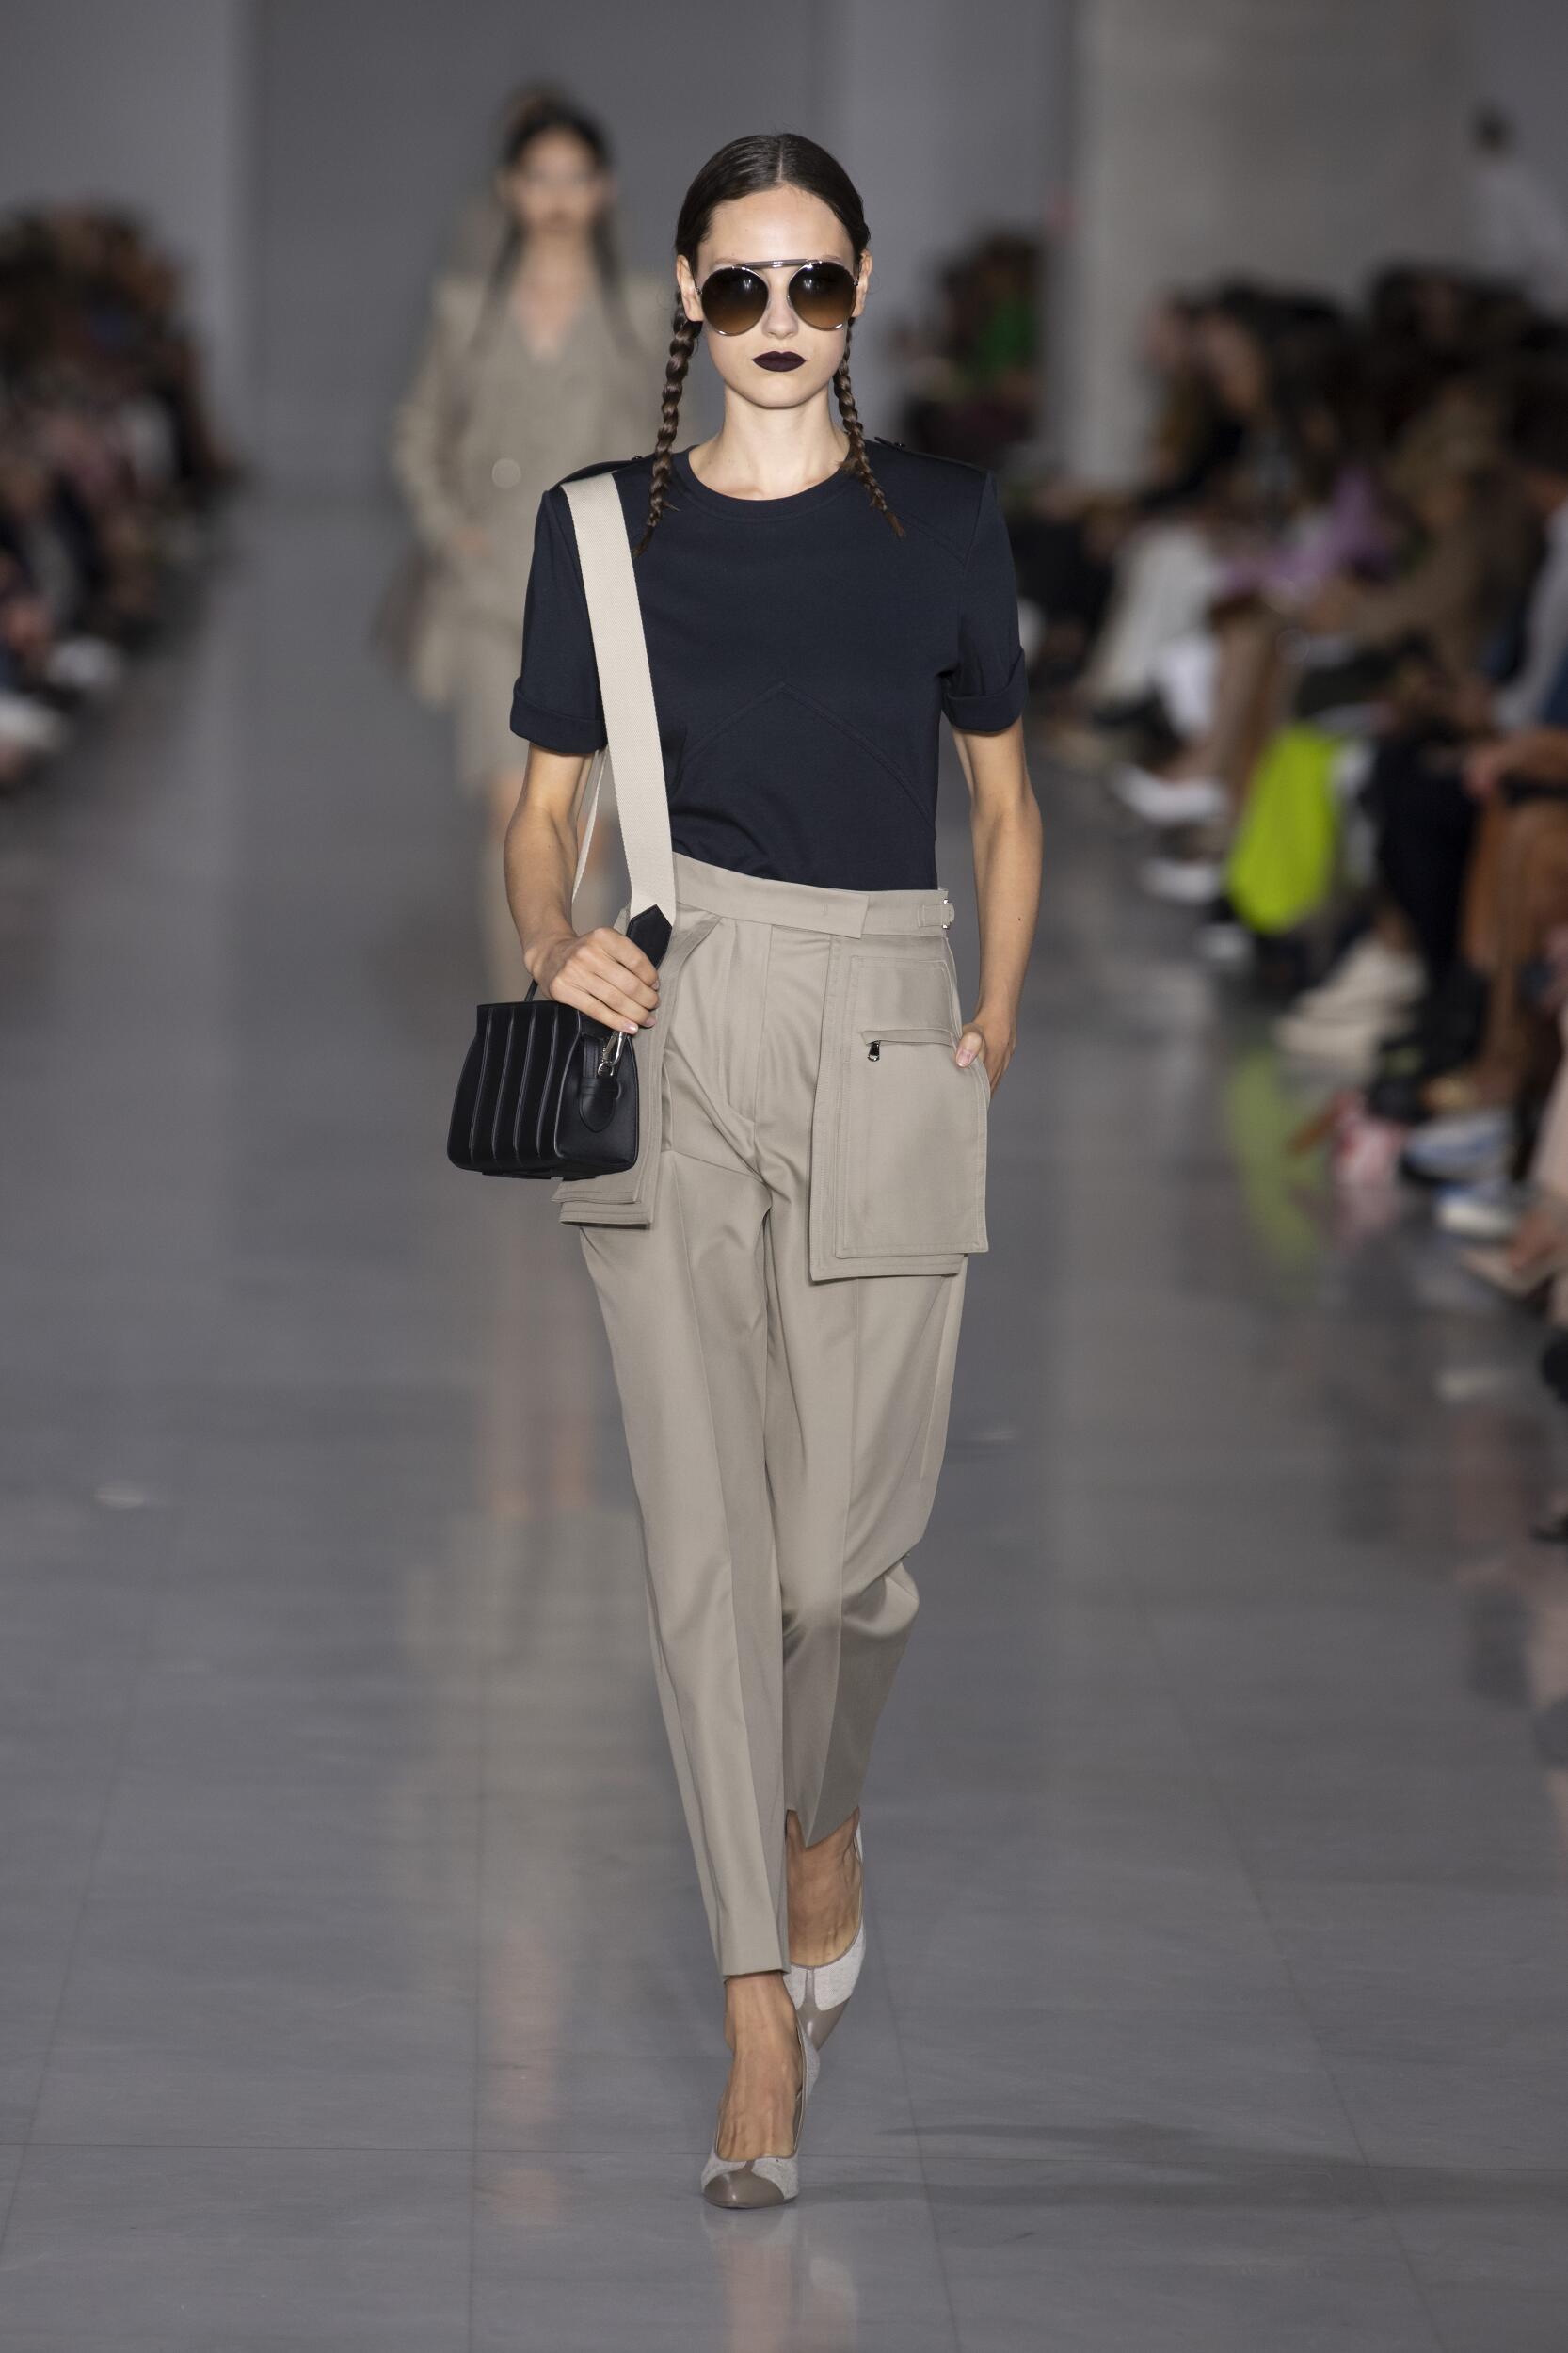 MAX MARA SPRING SUMMER 2020 WOMEN’S COLLECTION | The Skinny Beep